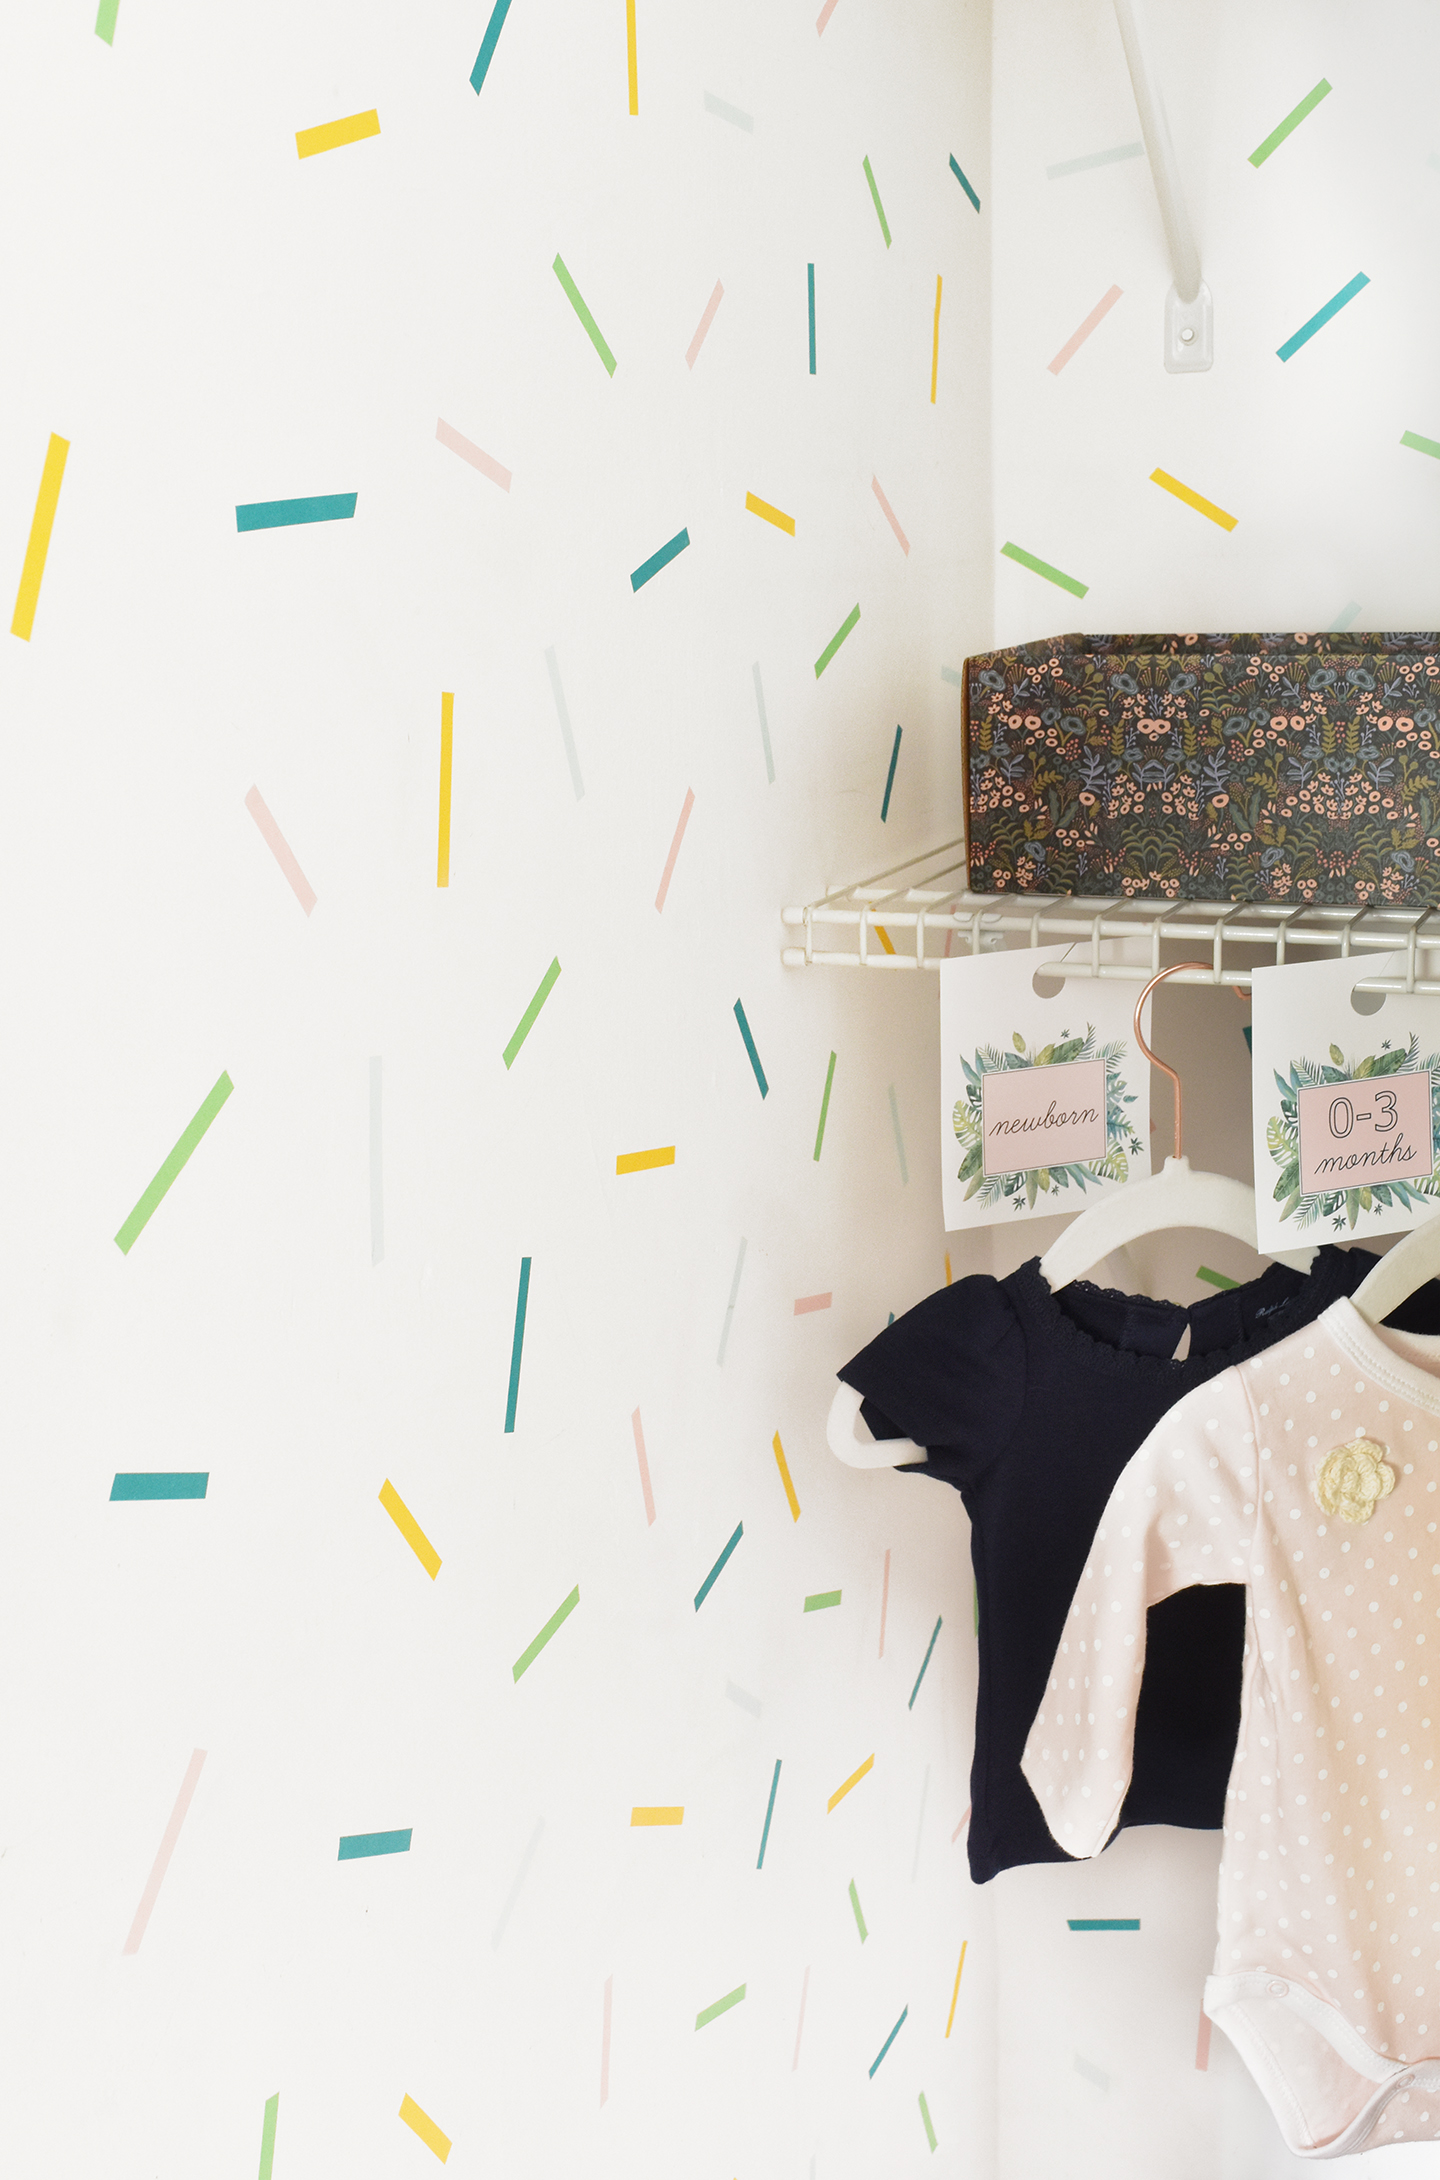 Make Your Own Easy DIY Confetti Washi Tape Wall | It's a cheap, colorful and easy project that's great for closets, accent walls and photo backdrops (it's perfect for renters too!) /// By Design Fixation #accent #wall #nursery